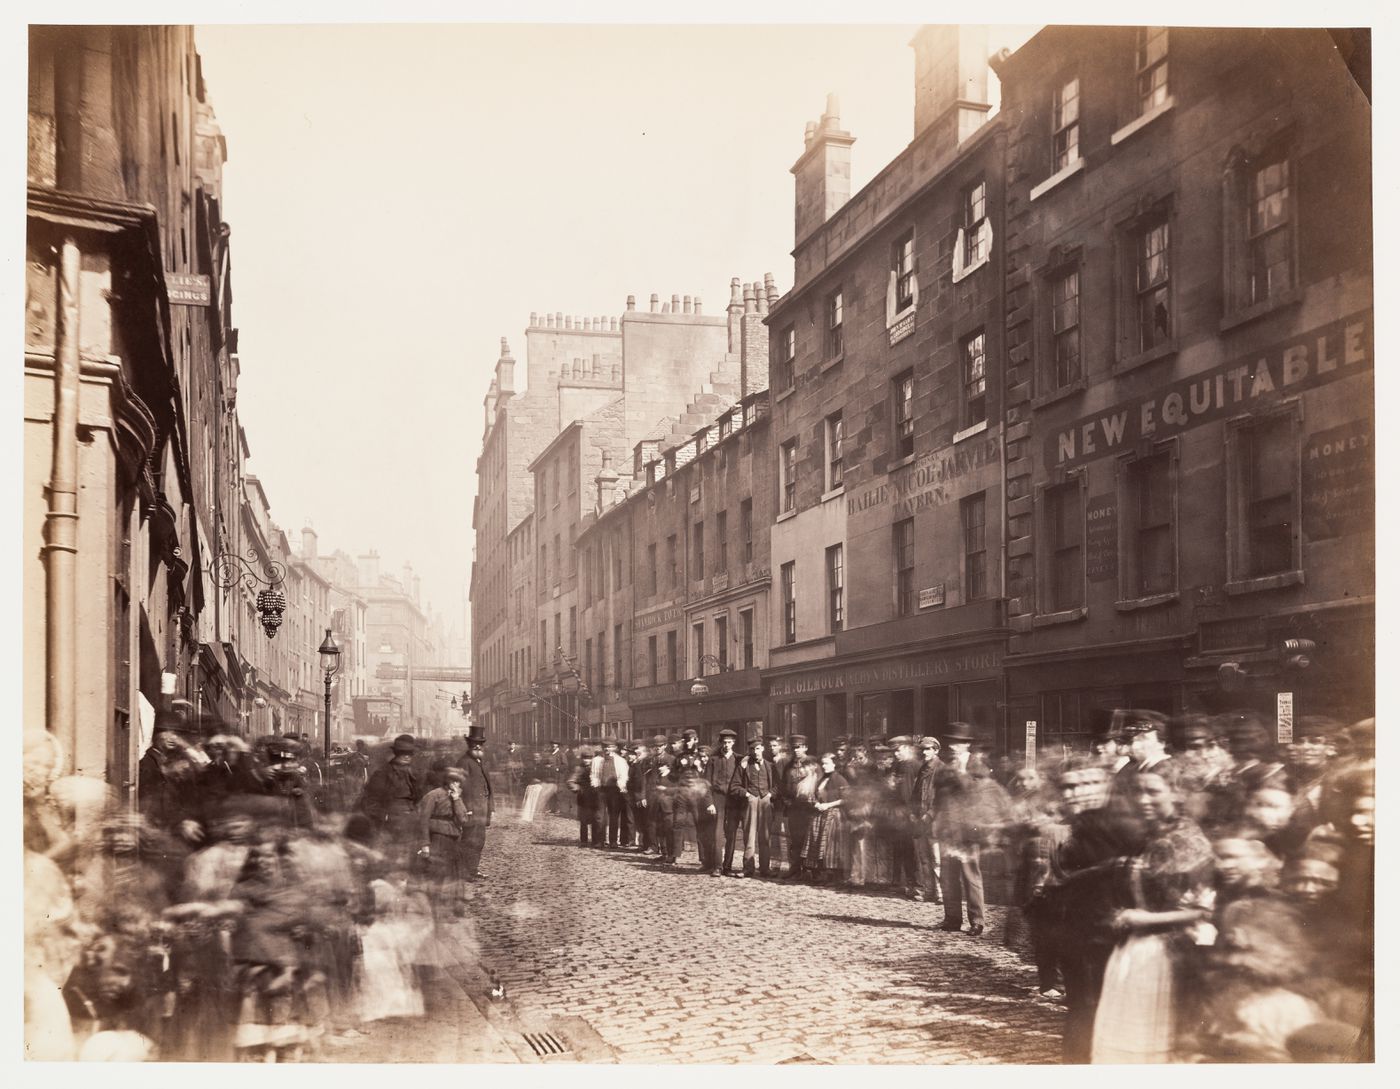 View of Saltmarket [street] showing taverns and other commercial buildings, Glasgow, Scotland